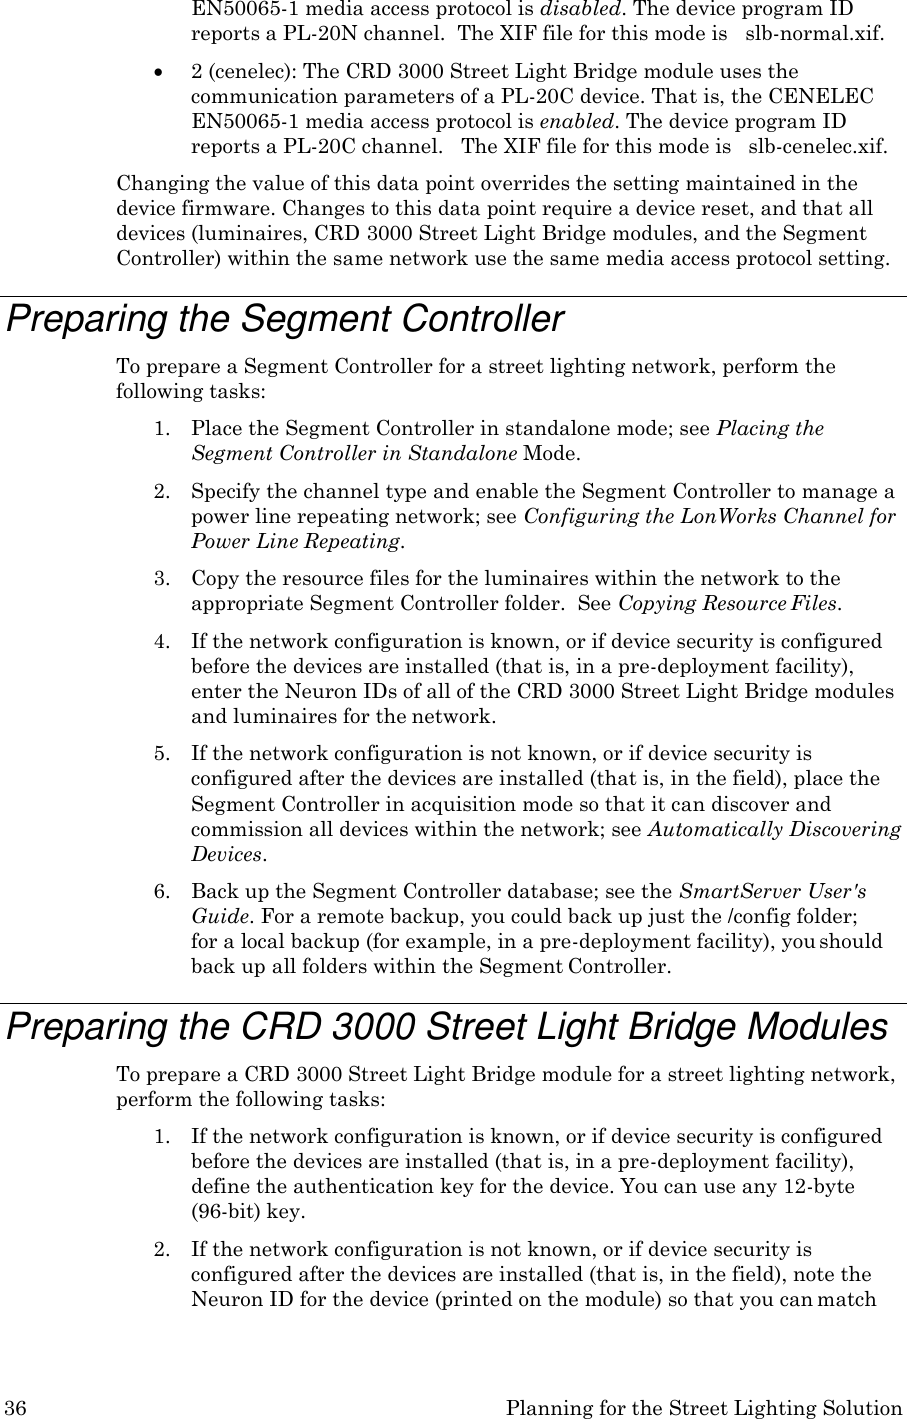 36 Planning for the Street Lighting Solution  EN50065-1 media access protocol is disabled. The device program ID reports a PL-20N channel.  The XIF file for this mode is   slb-normal.xif.  2 (cenelec): The CRD 3000 Street Light Bridge module uses the communication parameters of a PL-20C device. That is, the CENELEC EN50065-1 media access protocol is enabled. The device program ID reports a PL-20C channel.   The XIF file for this mode is   slb-cenelec.xif. Changing the value of this data point overrides the setting maintained in the device firmware. Changes to this data point require a device reset, and that all devices (luminaires, CRD 3000 Street Light Bridge modules, and the Segment Controller) within the same network use the same media access protocol setting.  Preparing the Segment Controller To prepare a Segment Controller for a street lighting network, perform the following tasks: 1. Place the Segment Controller in standalone mode; see Placing the Segment Controller in Standalone Mode. 2. Specify the channel type and enable the Segment Controller to manage a power line repeating network; see Configuring the LonWorks Channel for Power Line Repeating. 3. Copy the resource files for the luminaires within the network to the appropriate Segment Controller folder.  See Copying Resource Files. 4. If the network configuration is known, or if device security is configured before the devices are installed (that is, in a pre-deployment facility), enter the Neuron IDs of all of the CRD 3000 Street Light Bridge modules and luminaires for the network. 5. If the network configuration is not known, or if device security is configured after the devices are installed (that is, in the field), place the Segment Controller in acquisition mode so that it can discover and commission all devices within the network; see Automatically Discovering Devices. 6. Back up the Segment Controller database; see the SmartServer User&apos;s Guide. For a remote backup, you could back up just the /config folder;  for a local backup (for example, in a pre-deployment facility), you should back up all folders within the Segment Controller.  Preparing the CRD 3000 Street Light Bridge Modules To prepare a CRD 3000 Street Light Bridge module for a street lighting network, perform the following tasks: 1. If the network configuration is known, or if device security is configured before the devices are installed (that is, in a pre-deployment facility), define the authentication key for the device. You can use any 12-byte (96-bit) key. 2. If the network configuration is not known, or if device security is configured after the devices are installed (that is, in the field), note the Neuron ID for the device (printed on the module) so that you can match 